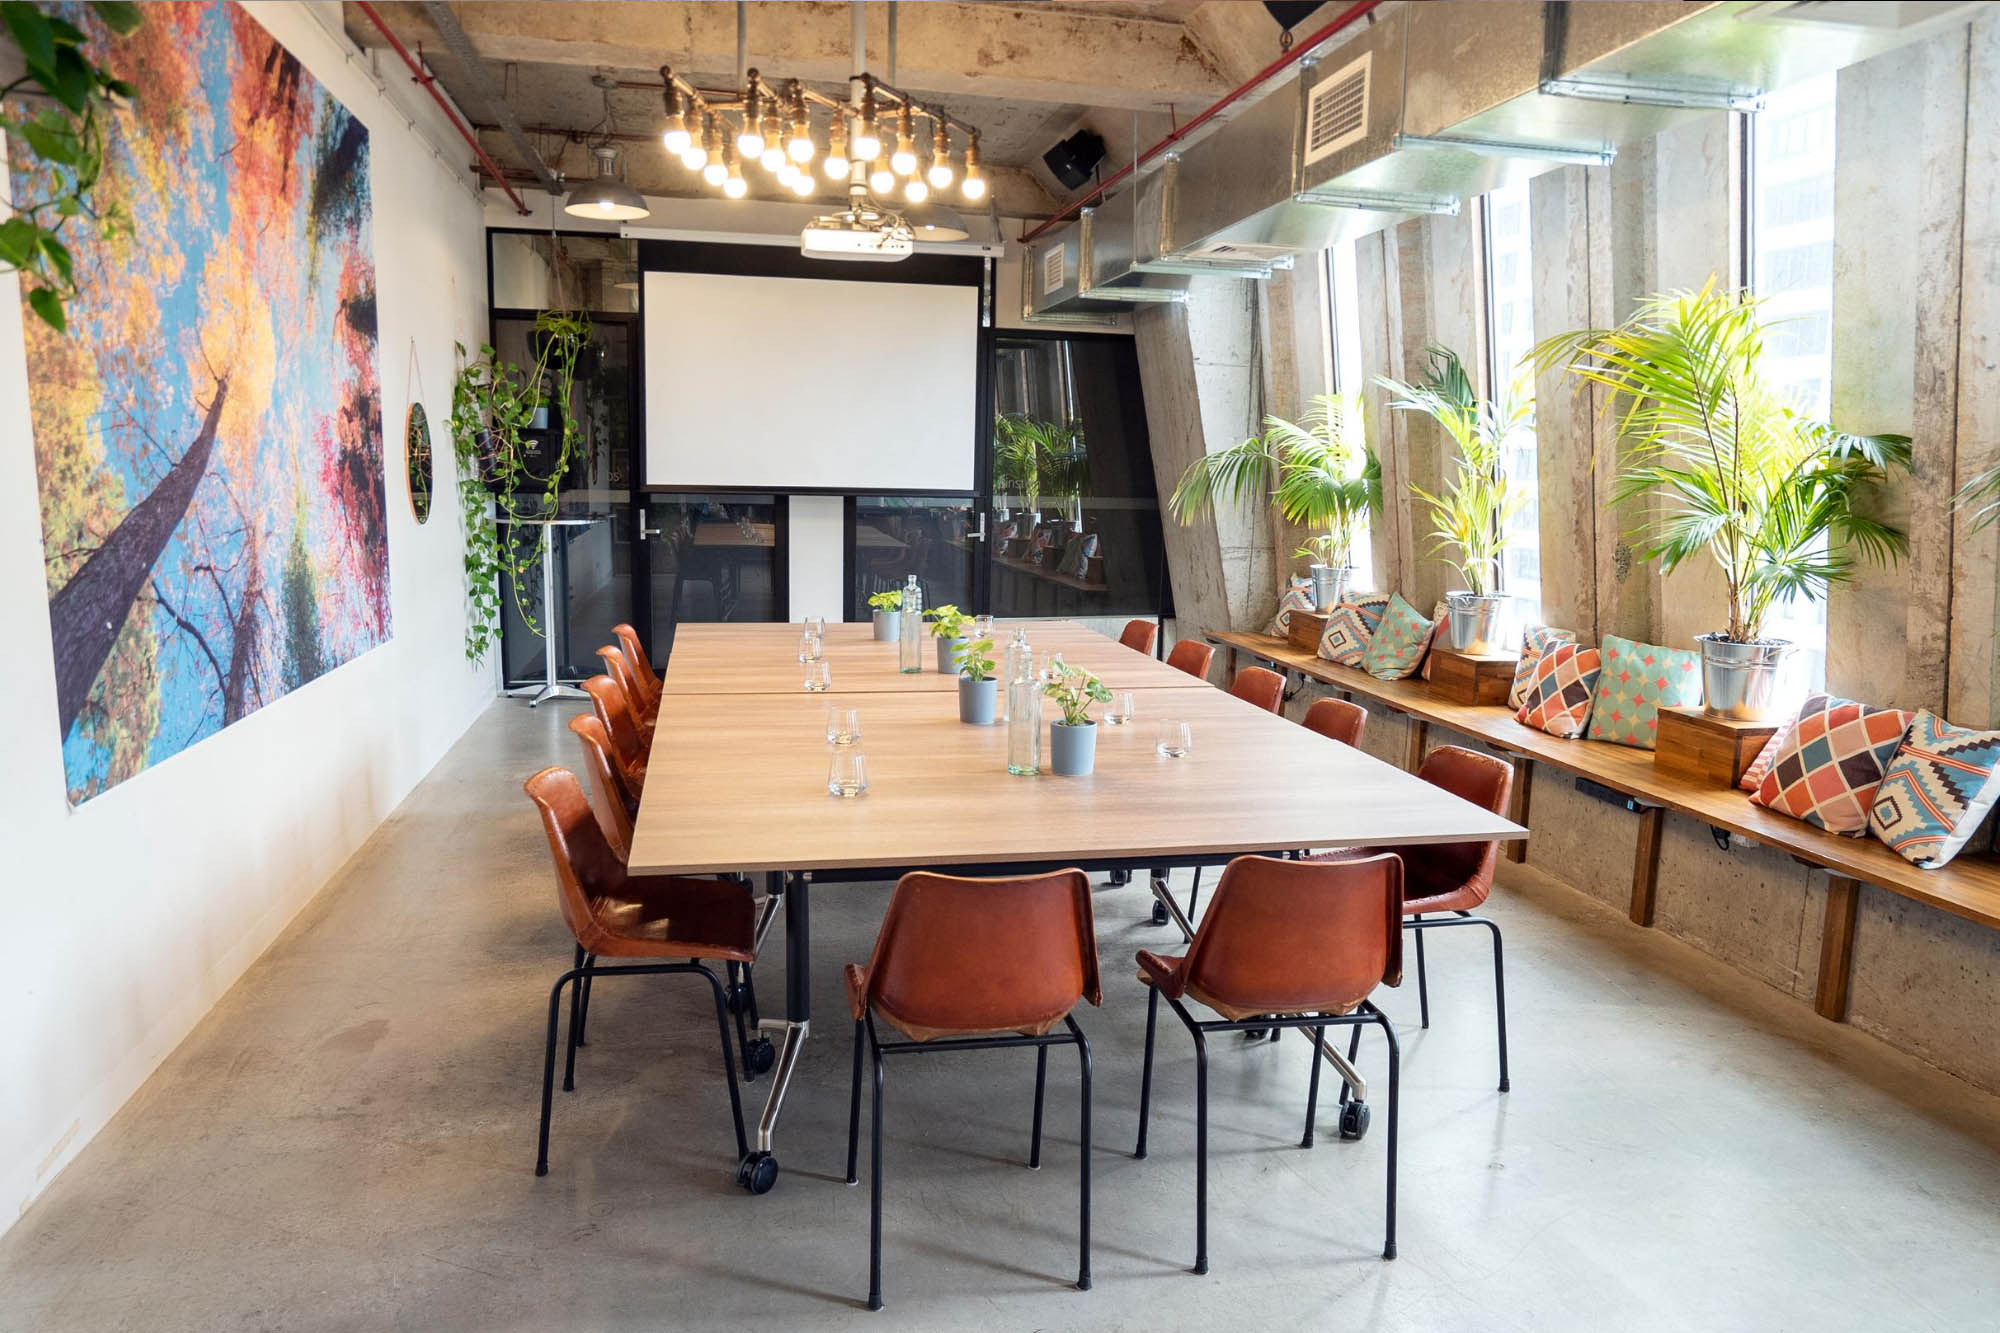 Warehouse 21 event space in Melbourne set up with a large boardroom table facing the projector